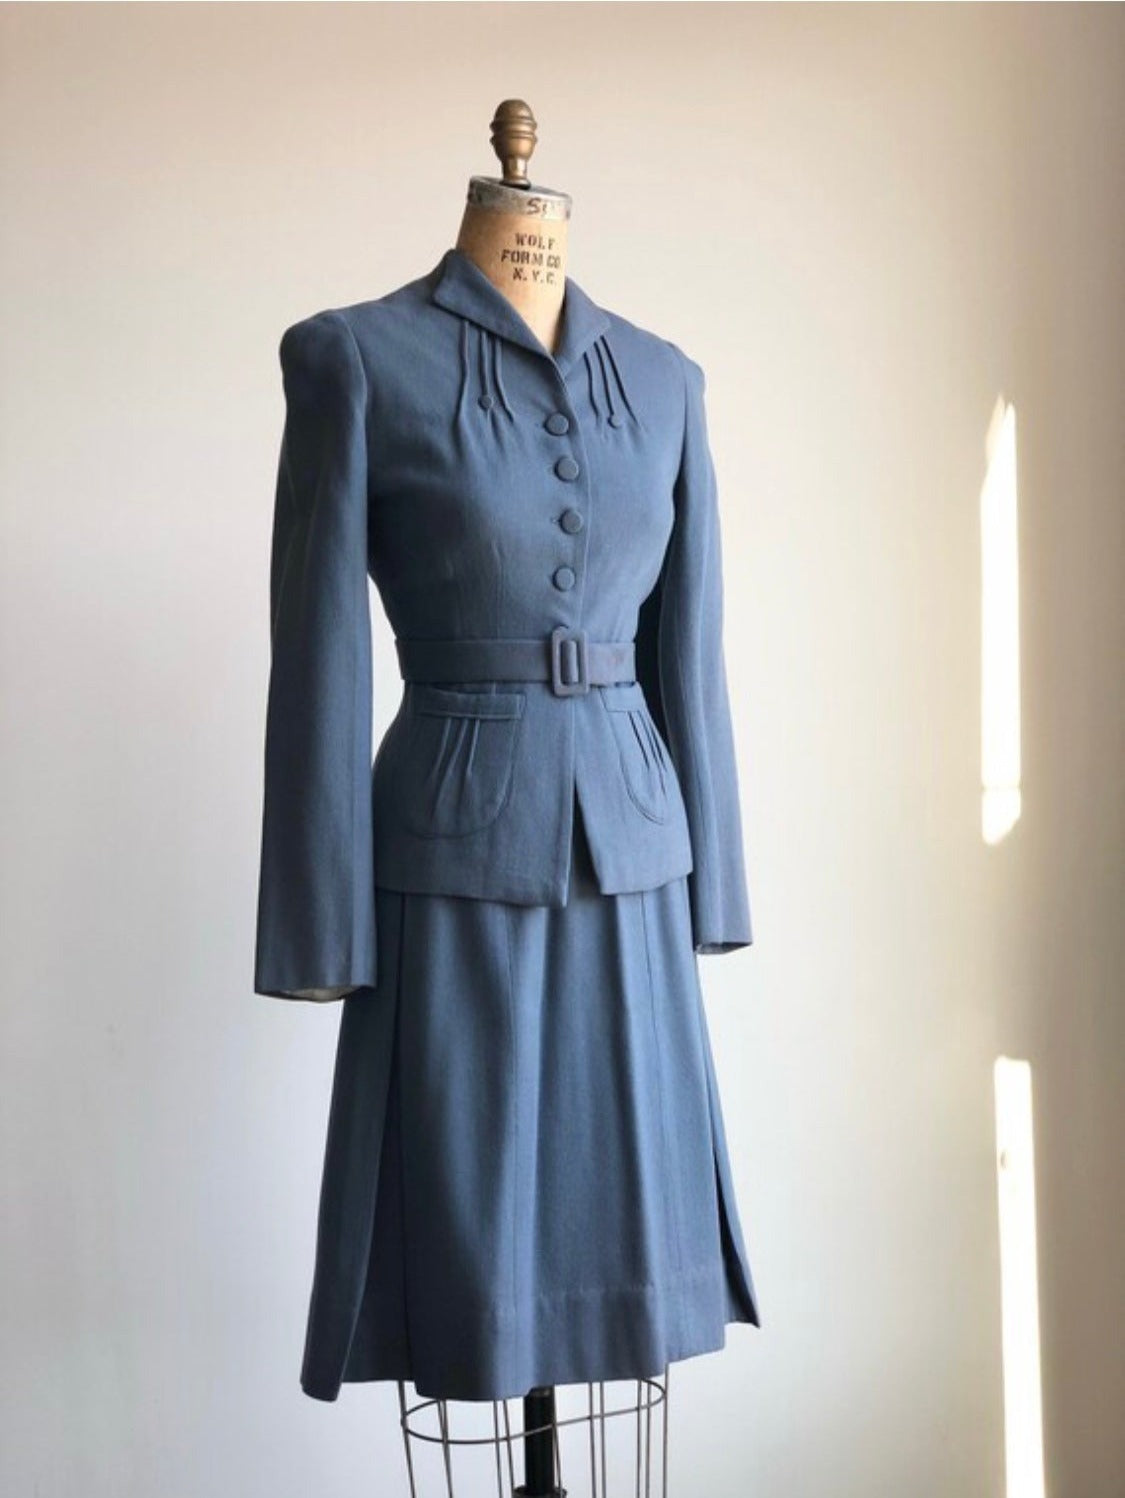 1940s Vintage Blue Wool Suit / Fantastic Tailoring / Short Pleated Skirt with Matching Belt